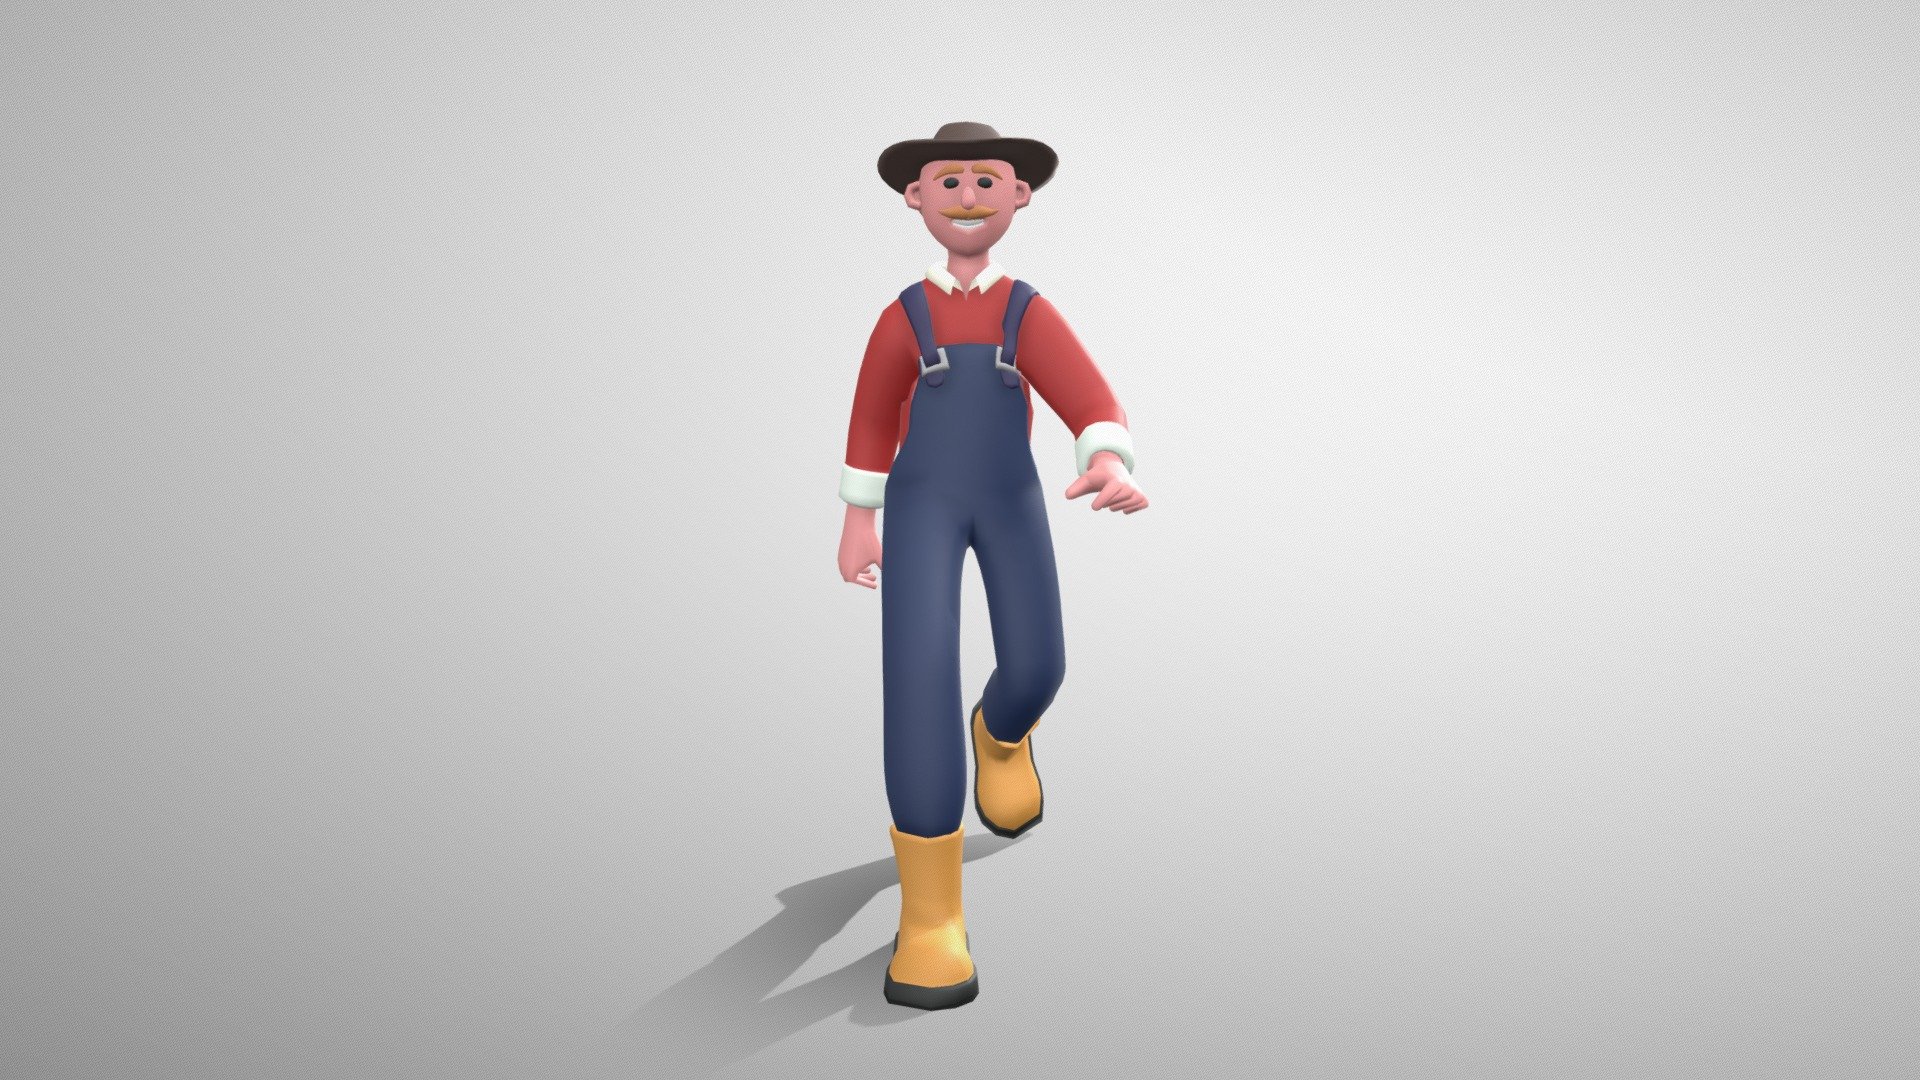 Stylized Man Farmer is the part of the big characters bundle. These stylized 3D characters might be useful for motion graphics design, cartoon production, game development, illustrations and many other industries.

The 3D model is rigged and ready to use with Mixamo. You can apply any Mixamo animation in one click . We also added 12 widely used animations.

The character model is well optimized and subdivision ready. You can choose any smoothing option you want, according to your project.

The model has only a single texture. It is useful for mobile game development and it's easy to change colors of clothes, skin etc.

If you have any questions or suggestions on improving our product, feel free to send a message to mail@dreamlab.net.ua - Stylized Man Farmer - Mixamo Rigged Character - Buy Royalty Free 3D model by Dream Lab (@dreamlabanim) 3d model